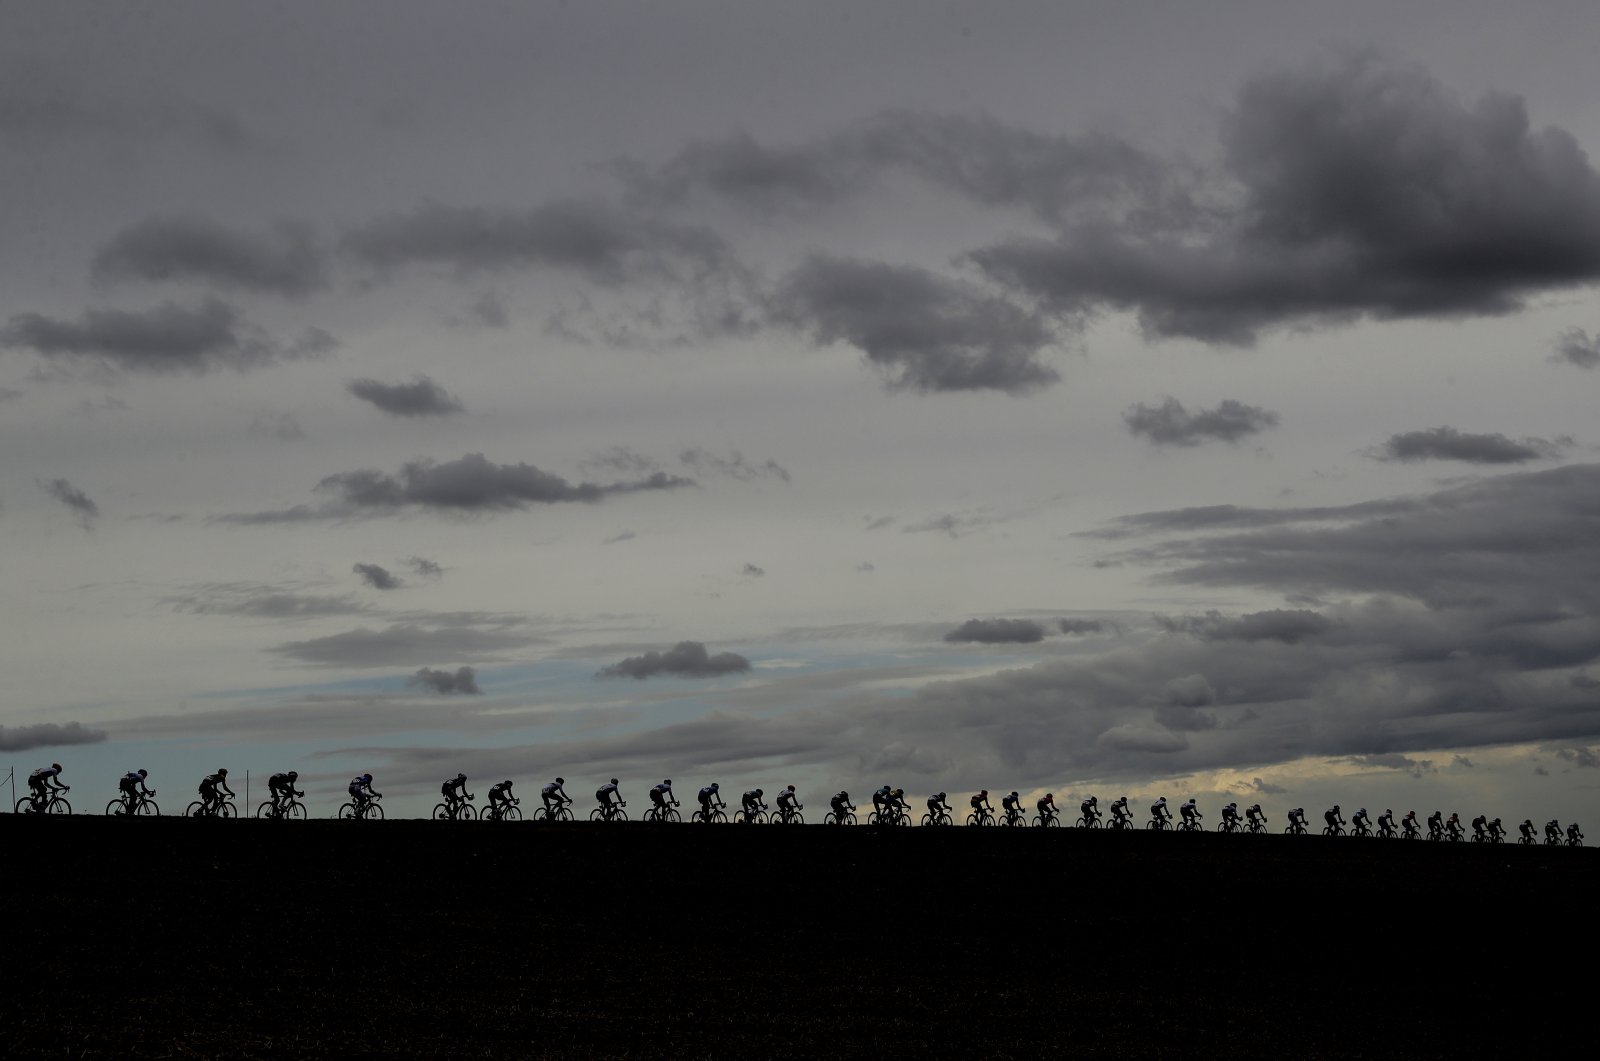 Riders pedal under a cloudy sky during the men's elite event at the road cycling World Championships, in Imola, Italy, Sept. 27, 2020. (AP Photo)